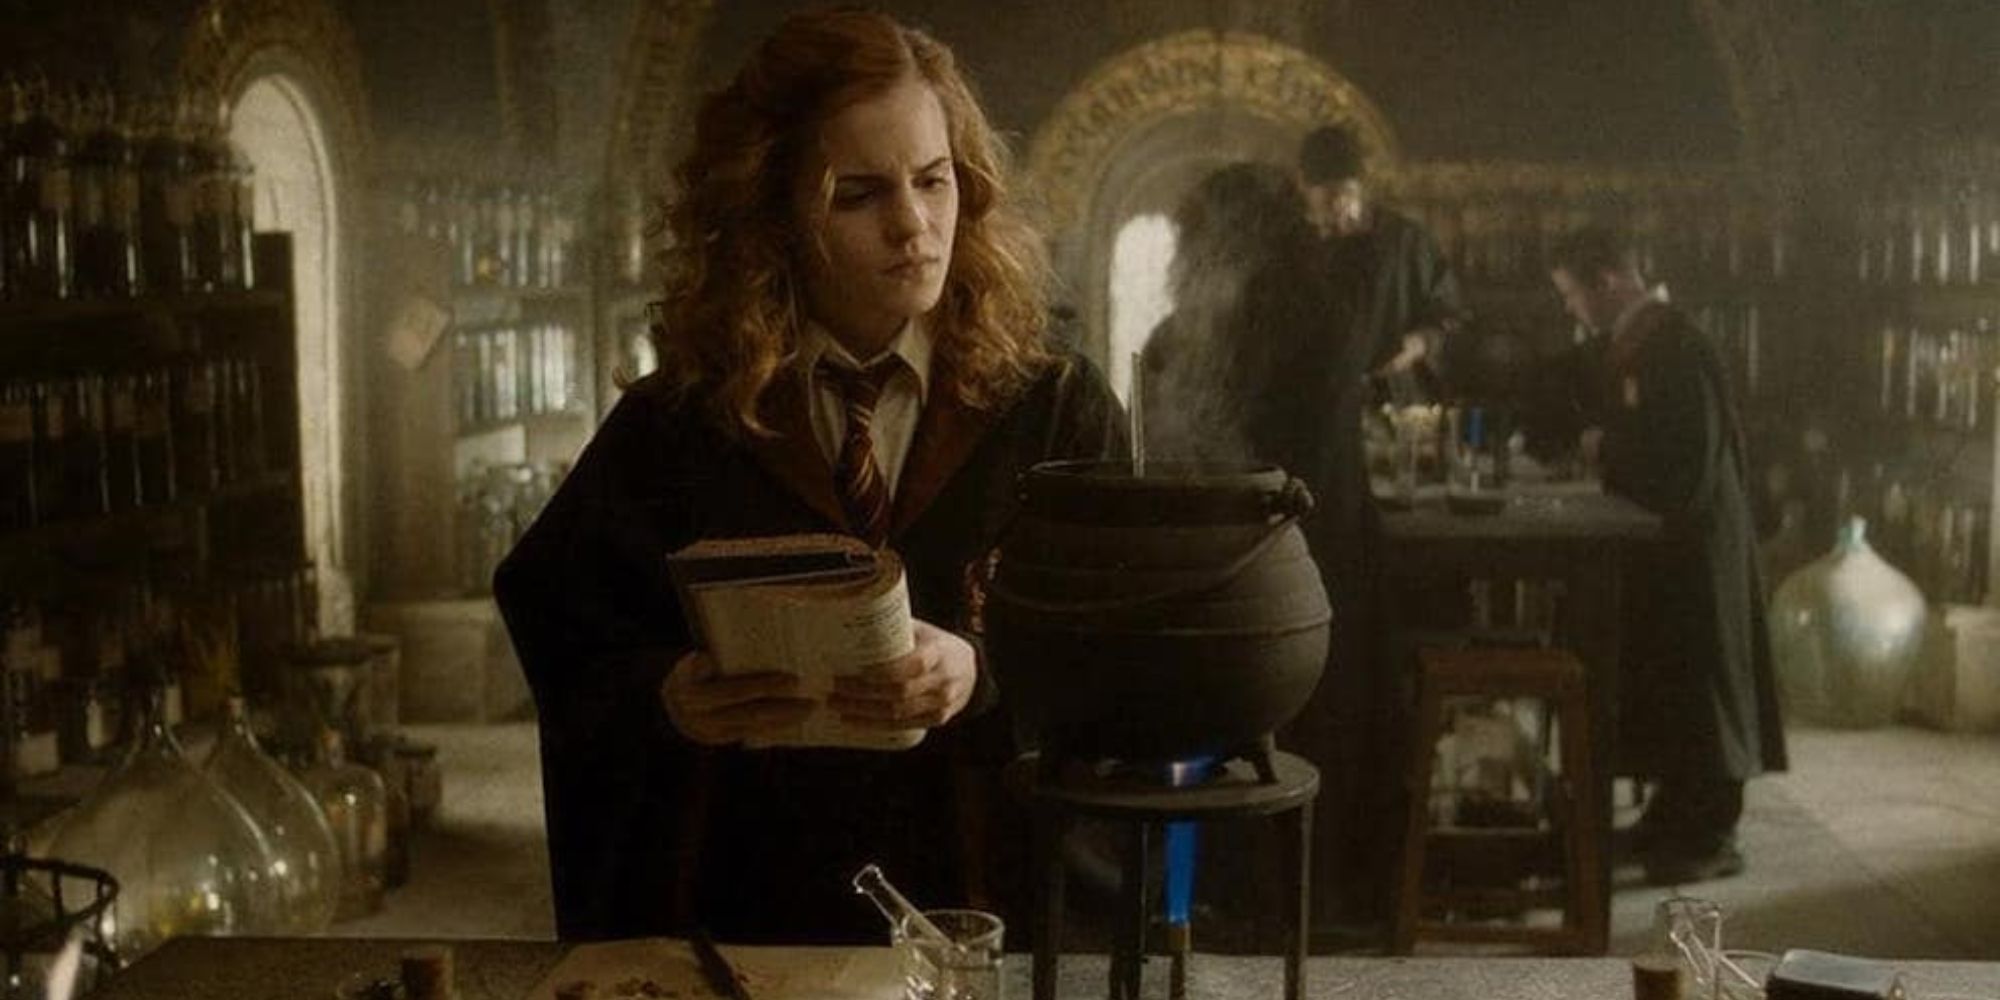 Harry Potter: 8 Most Dangerous Potions in the Wizarding World